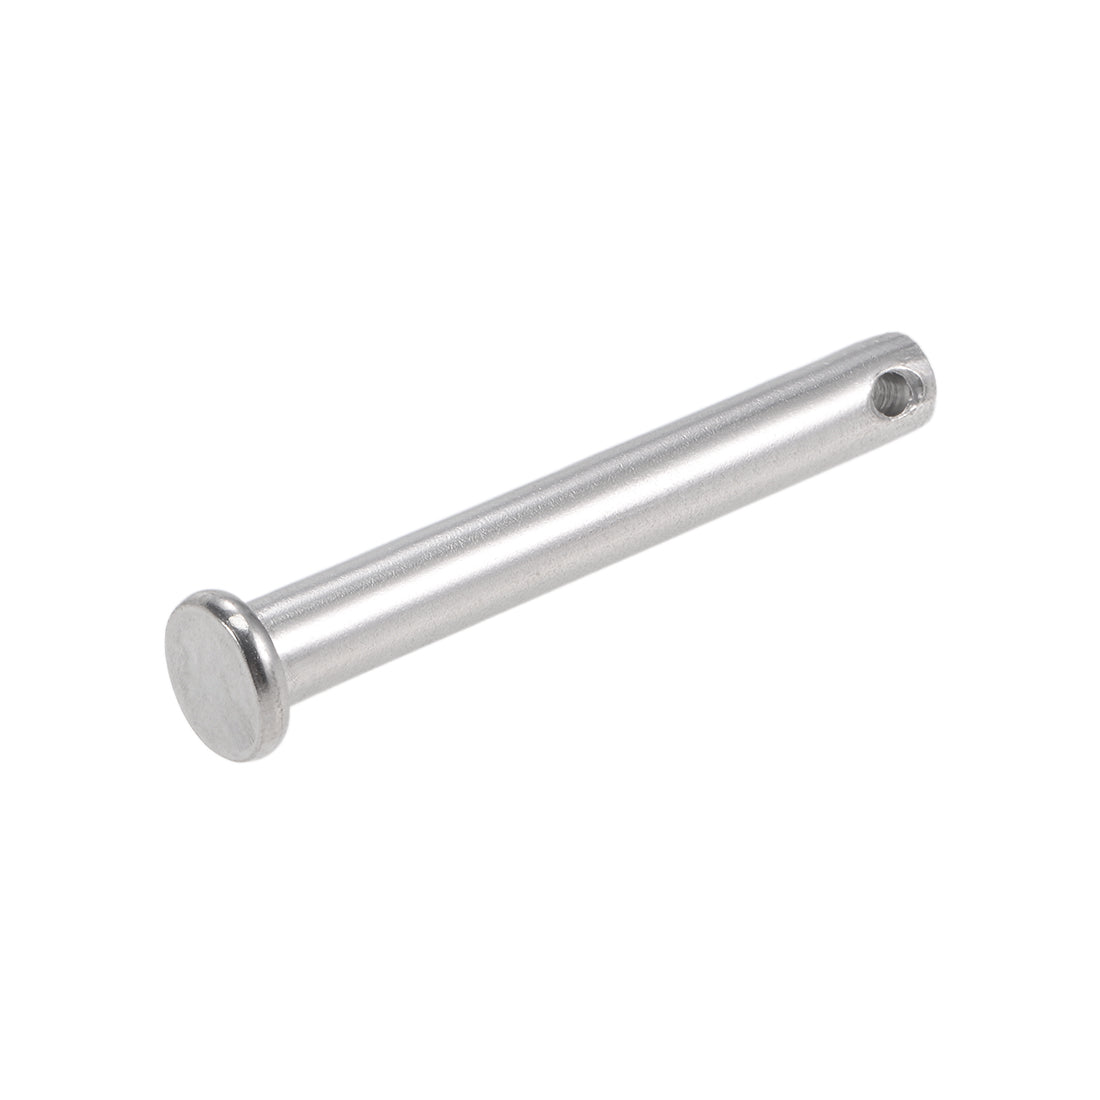 Uxcell Uxcell Single Hole Clevis Pins - 10mm x 60mm Flat Head 304 Stainless Steel Link Hinge Pin